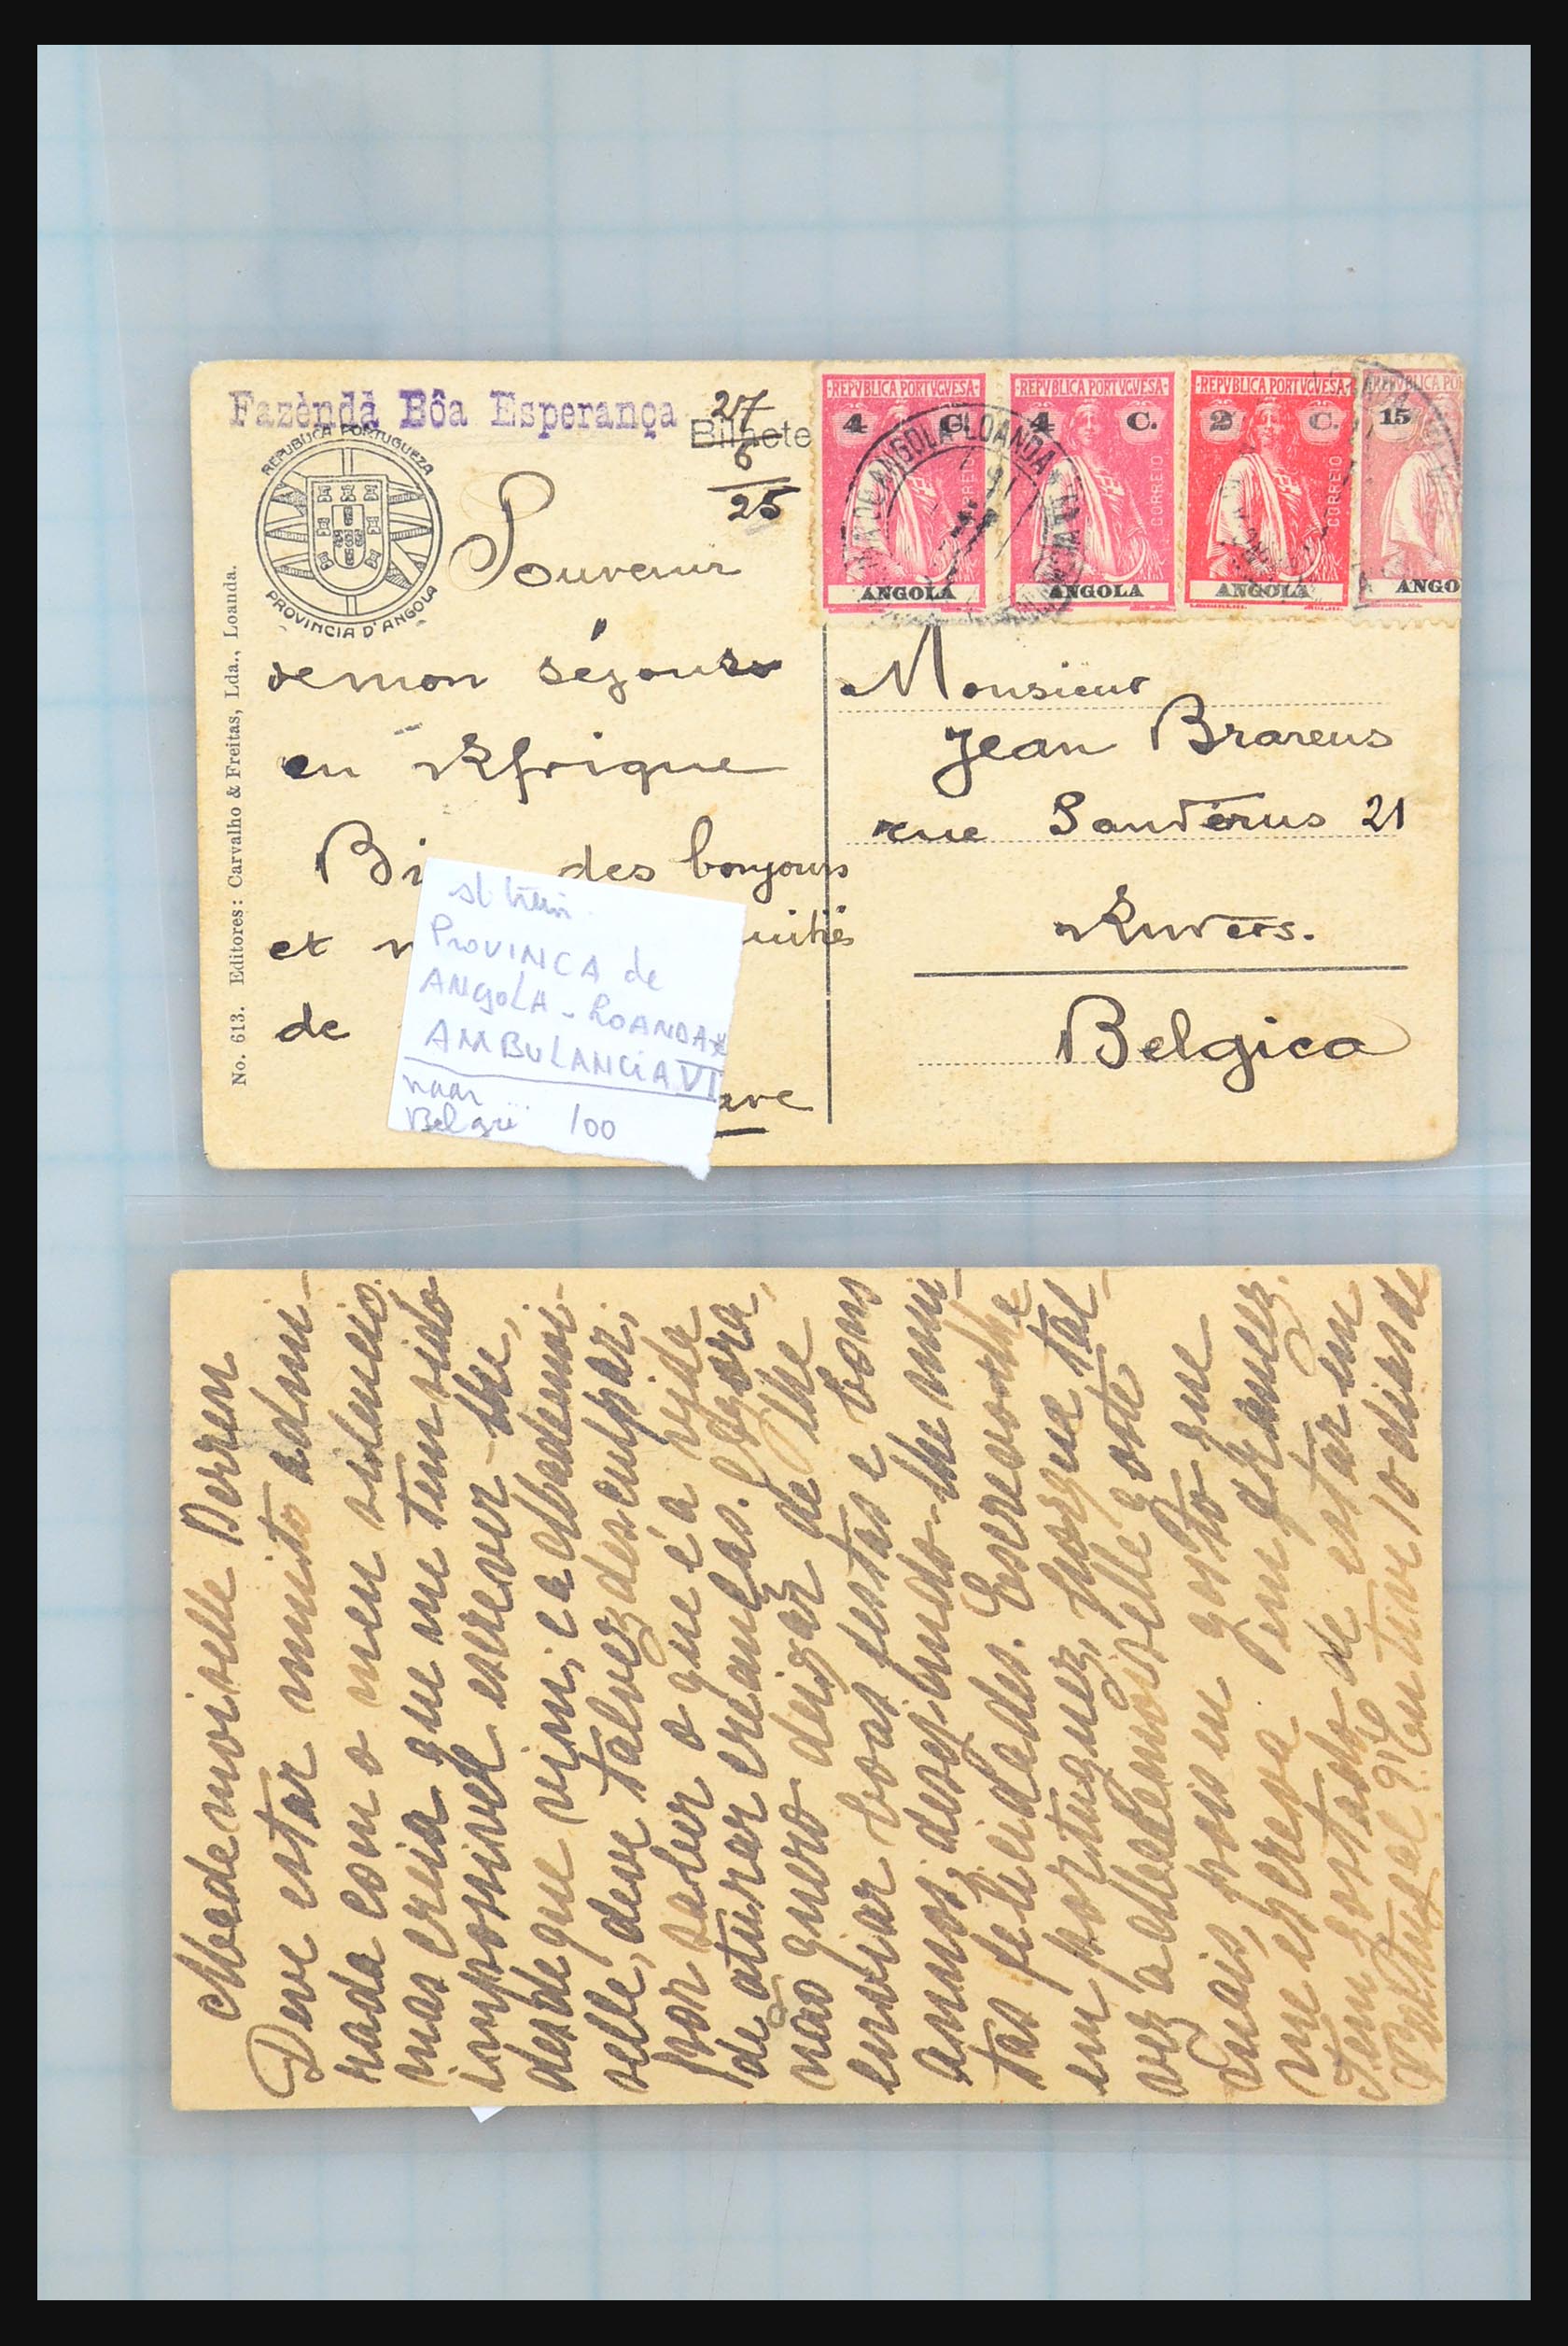 31358 255 - 31358 Portugal/Luxemburg/Greece covers 1880-1960.